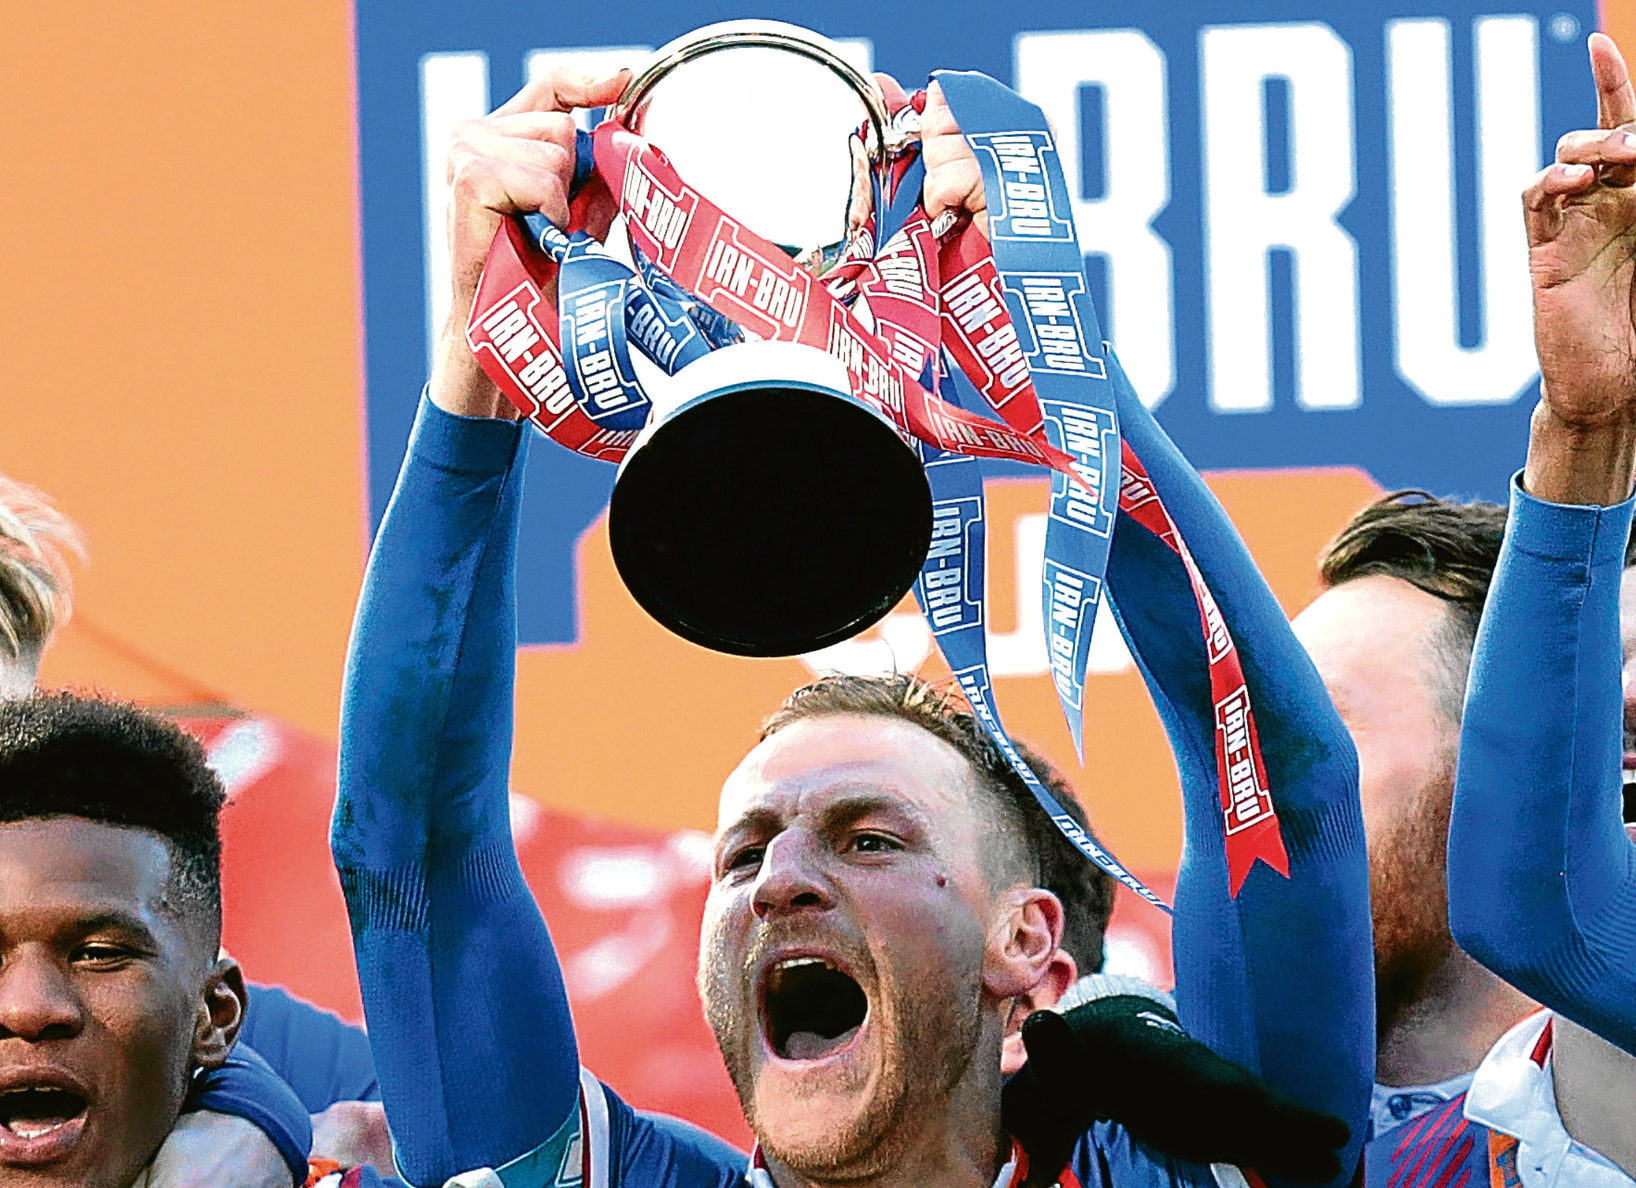 Caley Thistle last won the Challenge Cup in 2018.